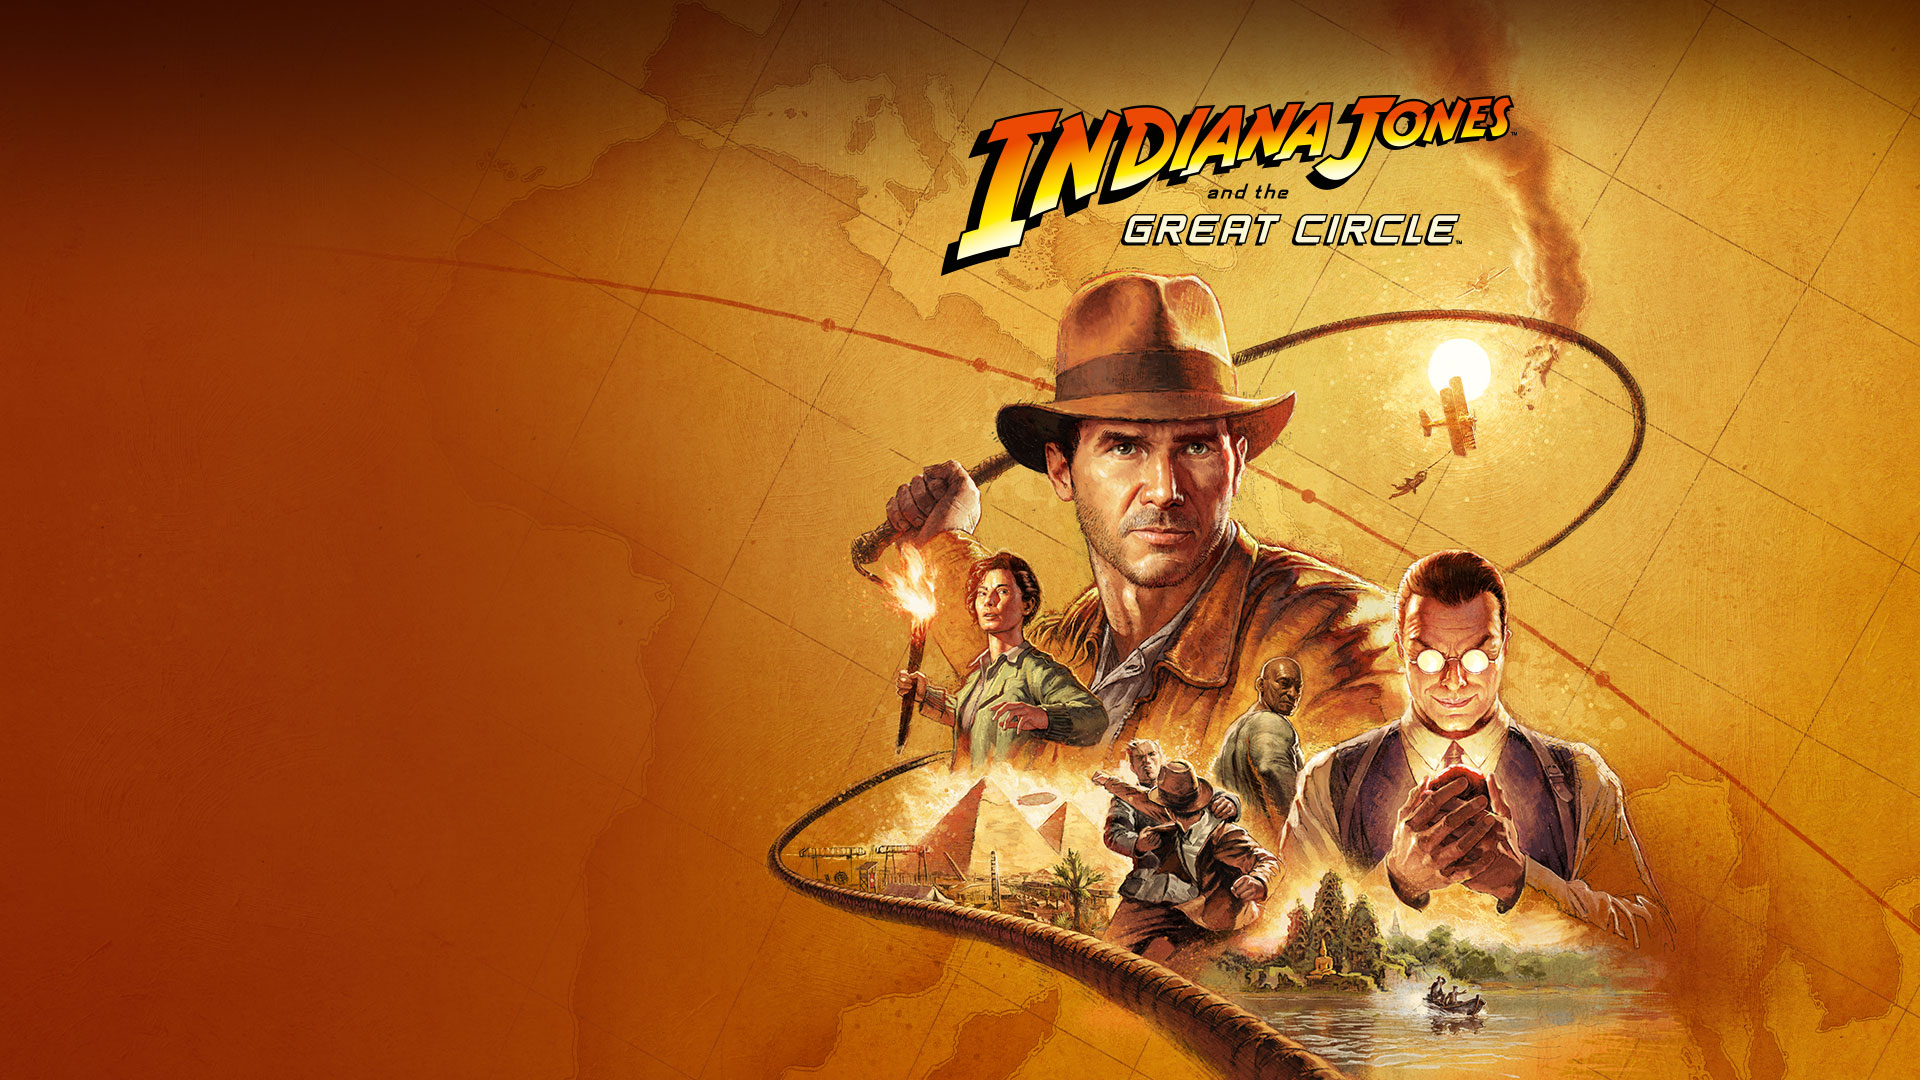 Indiana Jones and the Great Circle, a collage of Dr. Jones, his friends, and his enemies overlaying a sepia-toned map of the world.